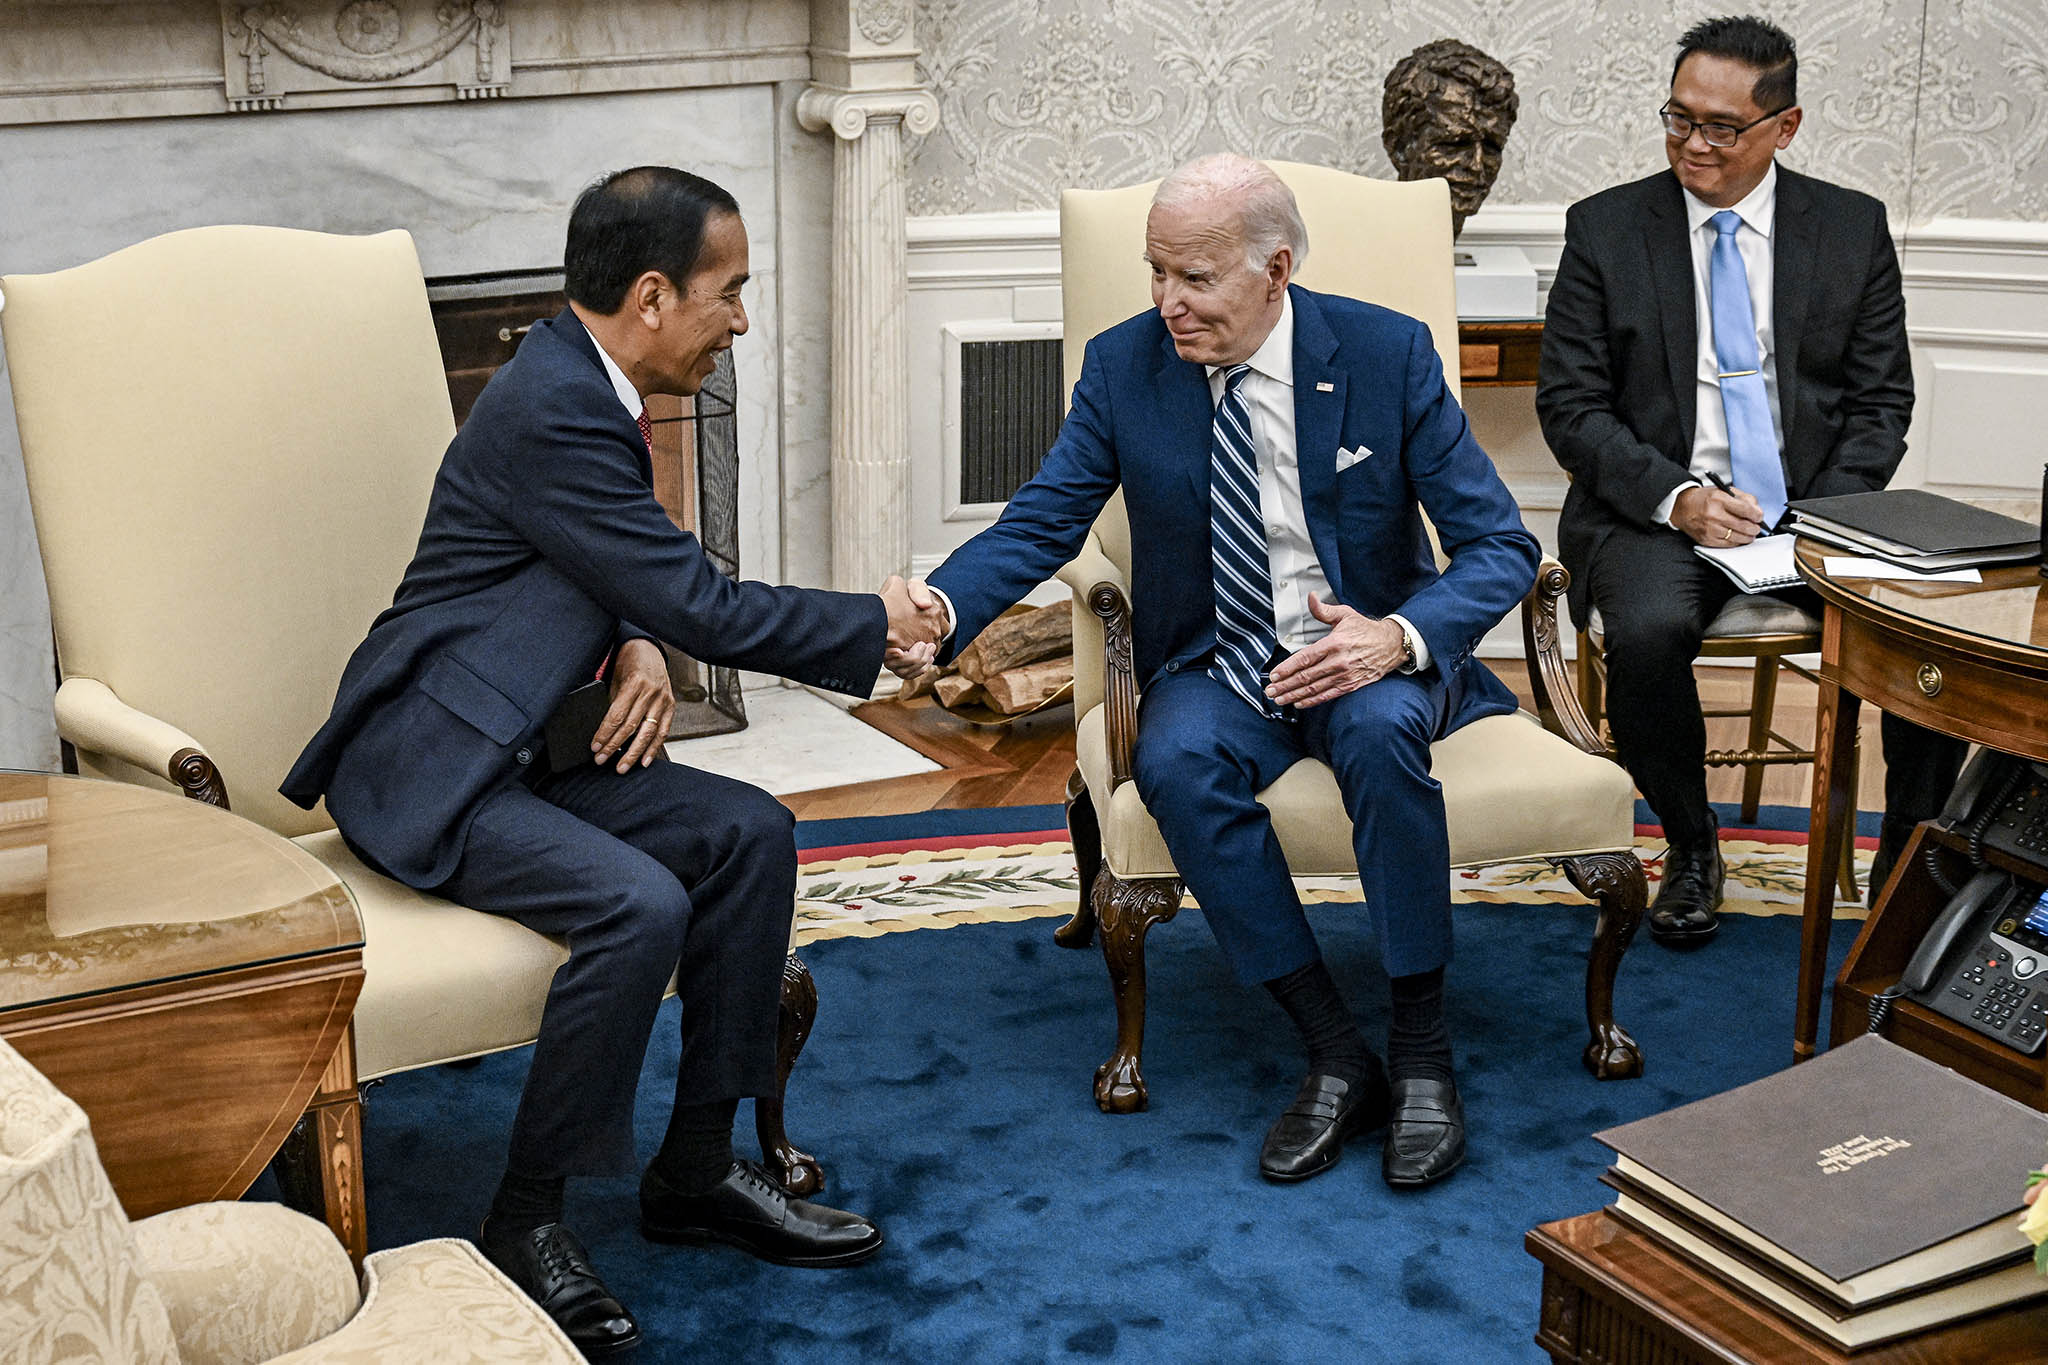 President Joe Biden meets with President Joko Widodo of Indonesia in the Oval Office of the White House in Washington. November 13, 2023. (Kenny Holston/The New York Times)